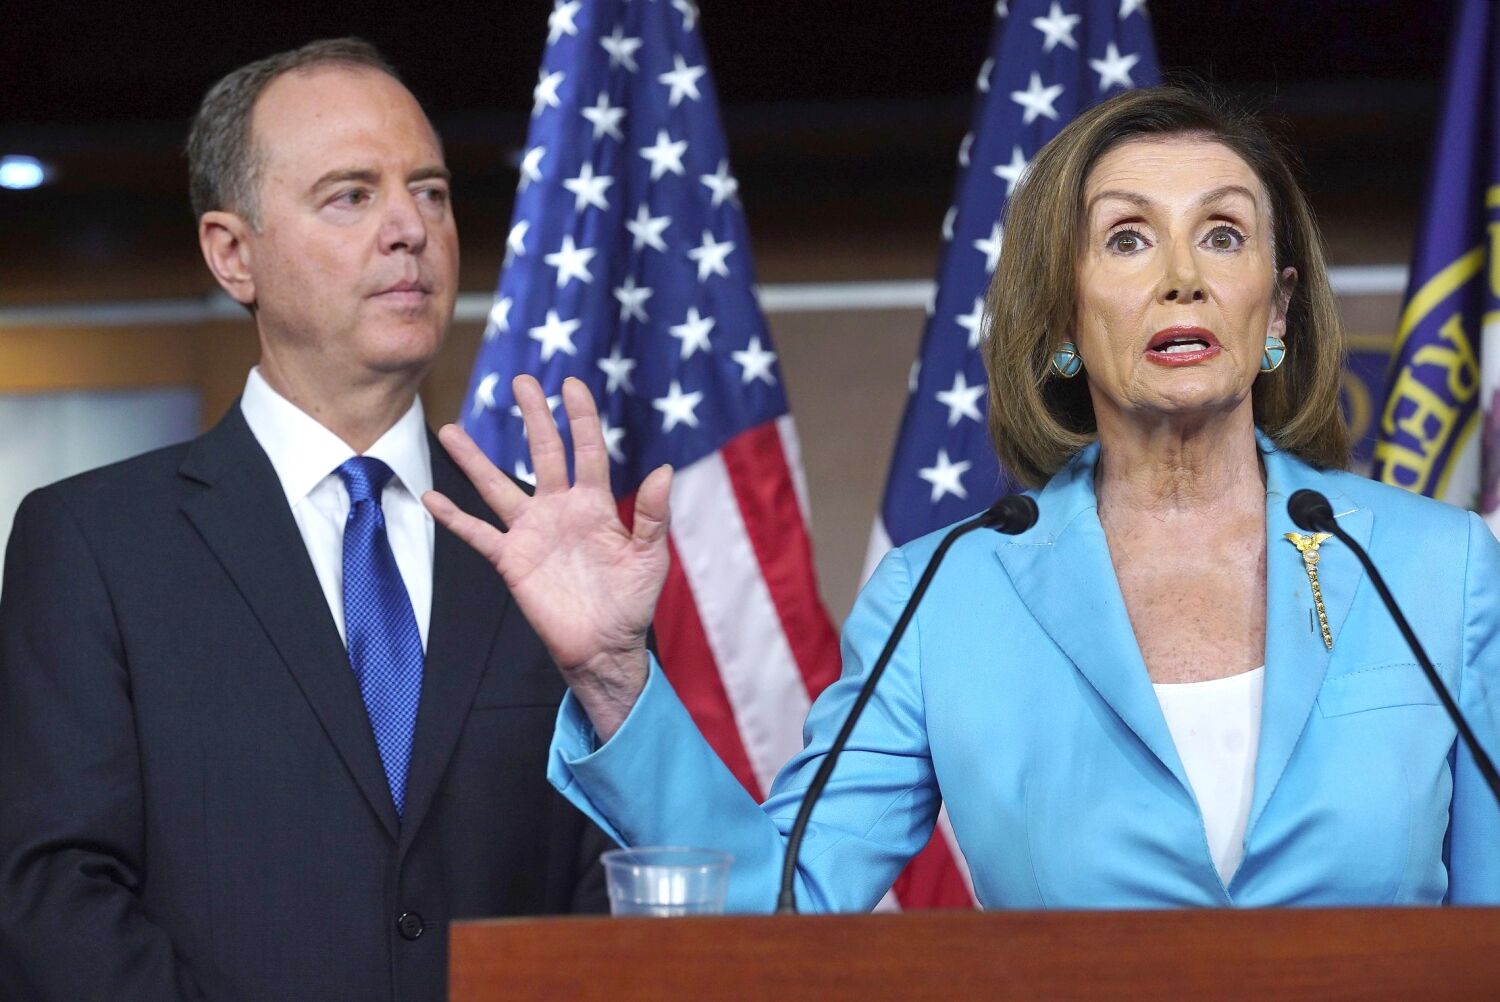 New Trump impeachment book details Schiff's role rallying moderates and Pelosi